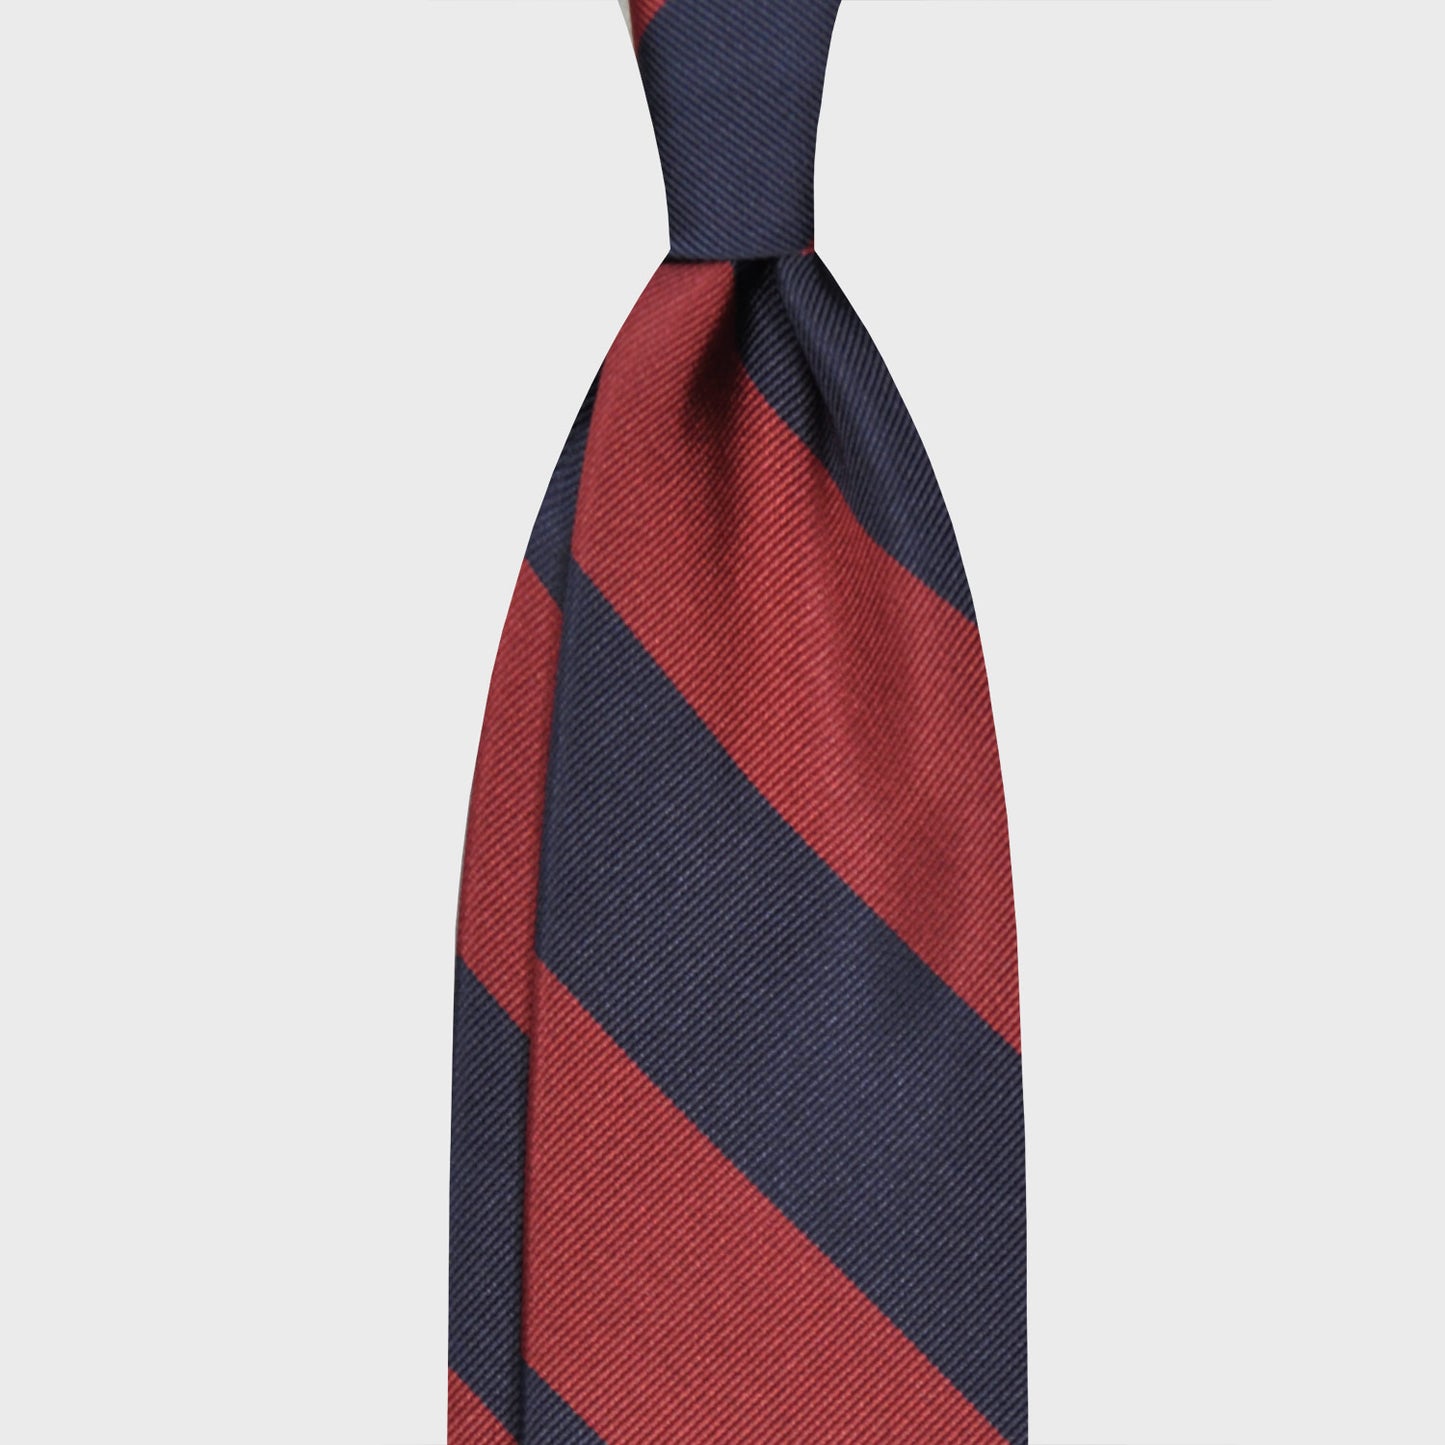 Chili Red Wide Striped Regimental Jacquard Silk Tie. Classic jacquard silk tie with wide striped chili red and navy blue, handmade in Italy by F.Marino Napoli exclusive for Wools Boutique Uomo, unlined regimental red tie 3 folds hand rolled edge.